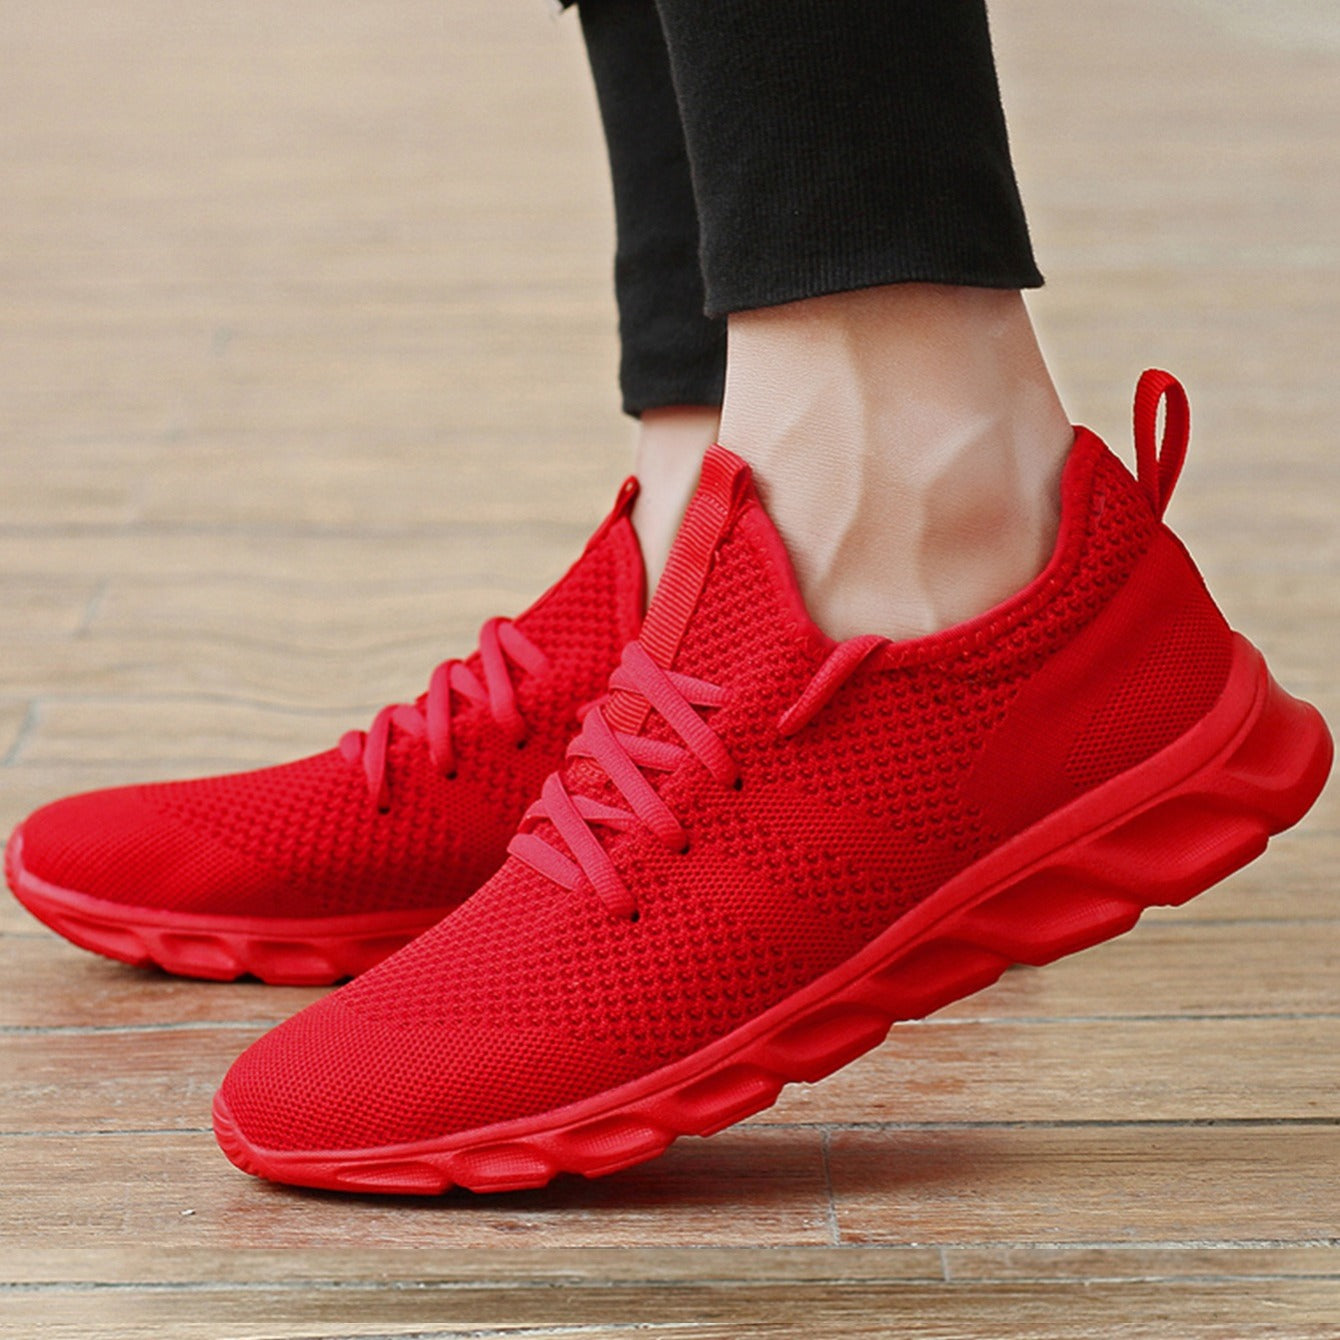 Breathable Lightweight Woven Running Shoes, Chinese New Year Gift